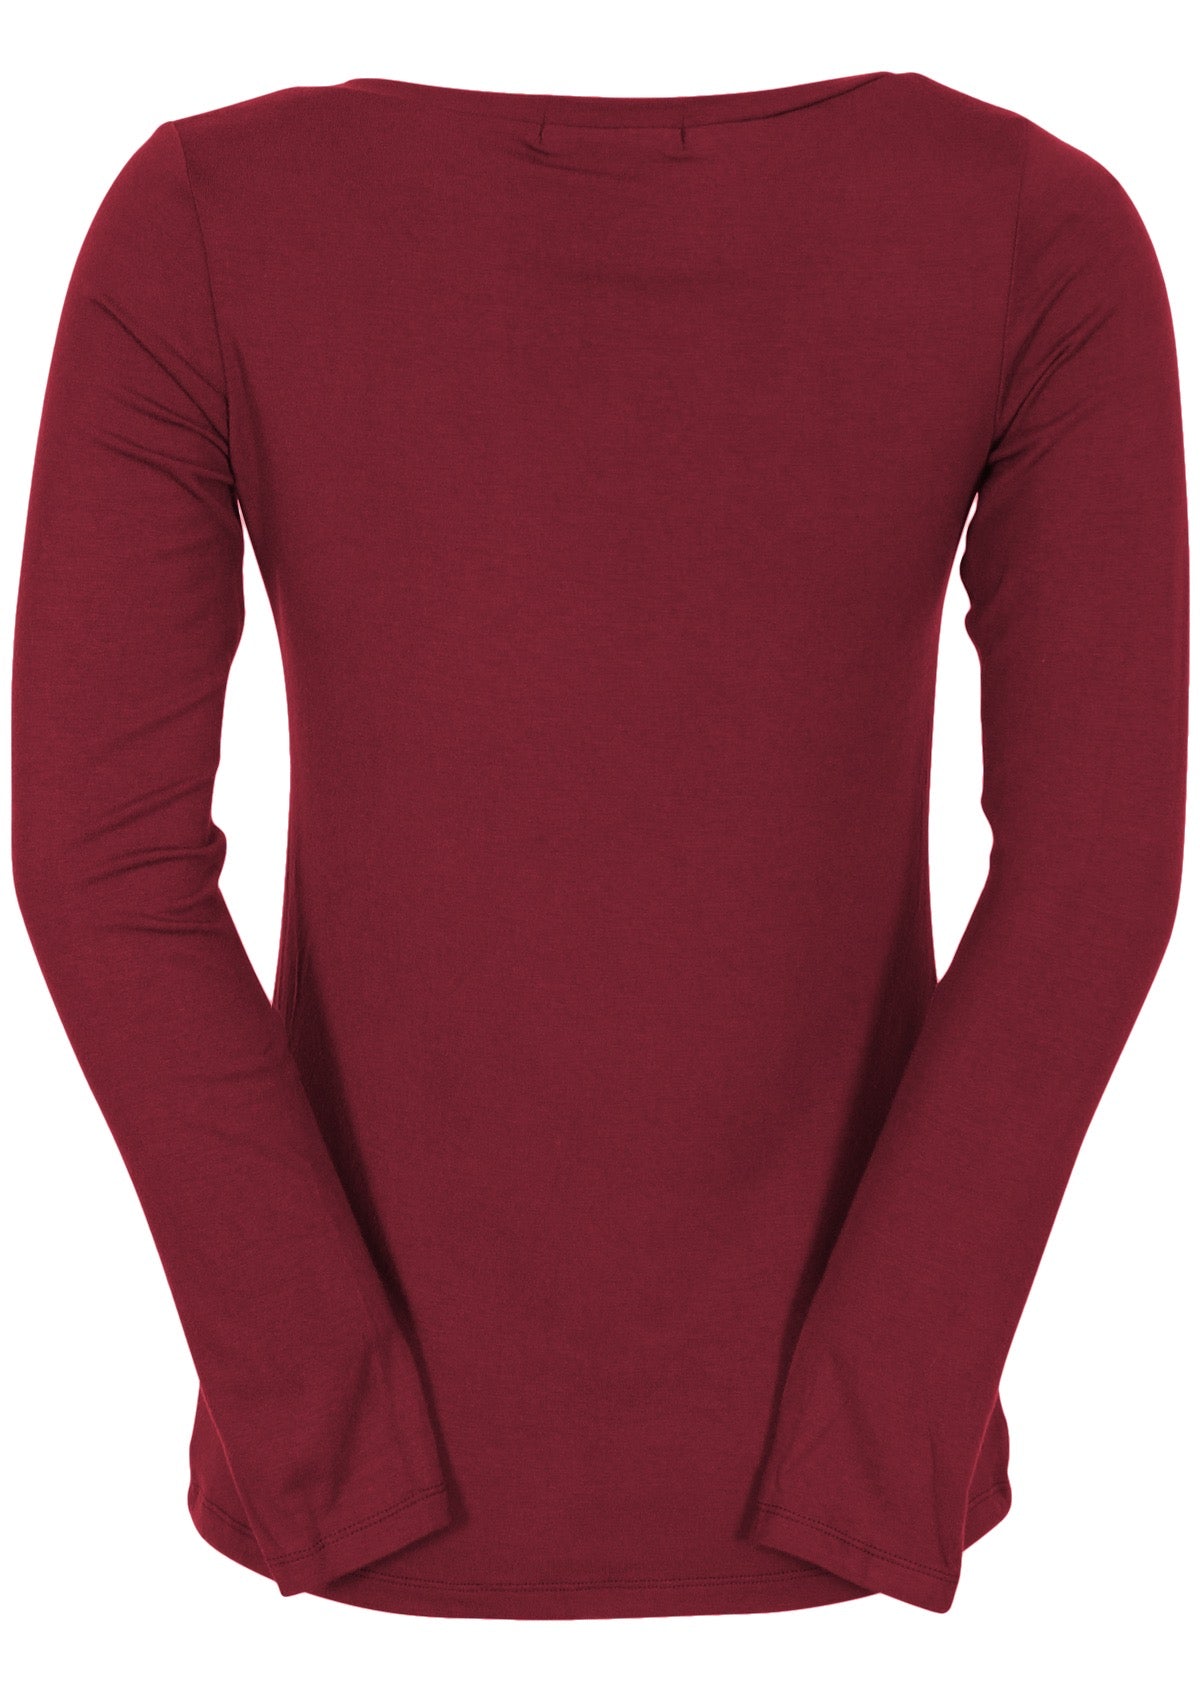 Back view of women's maroon long sleeve stretch v-neck soft rayon top.